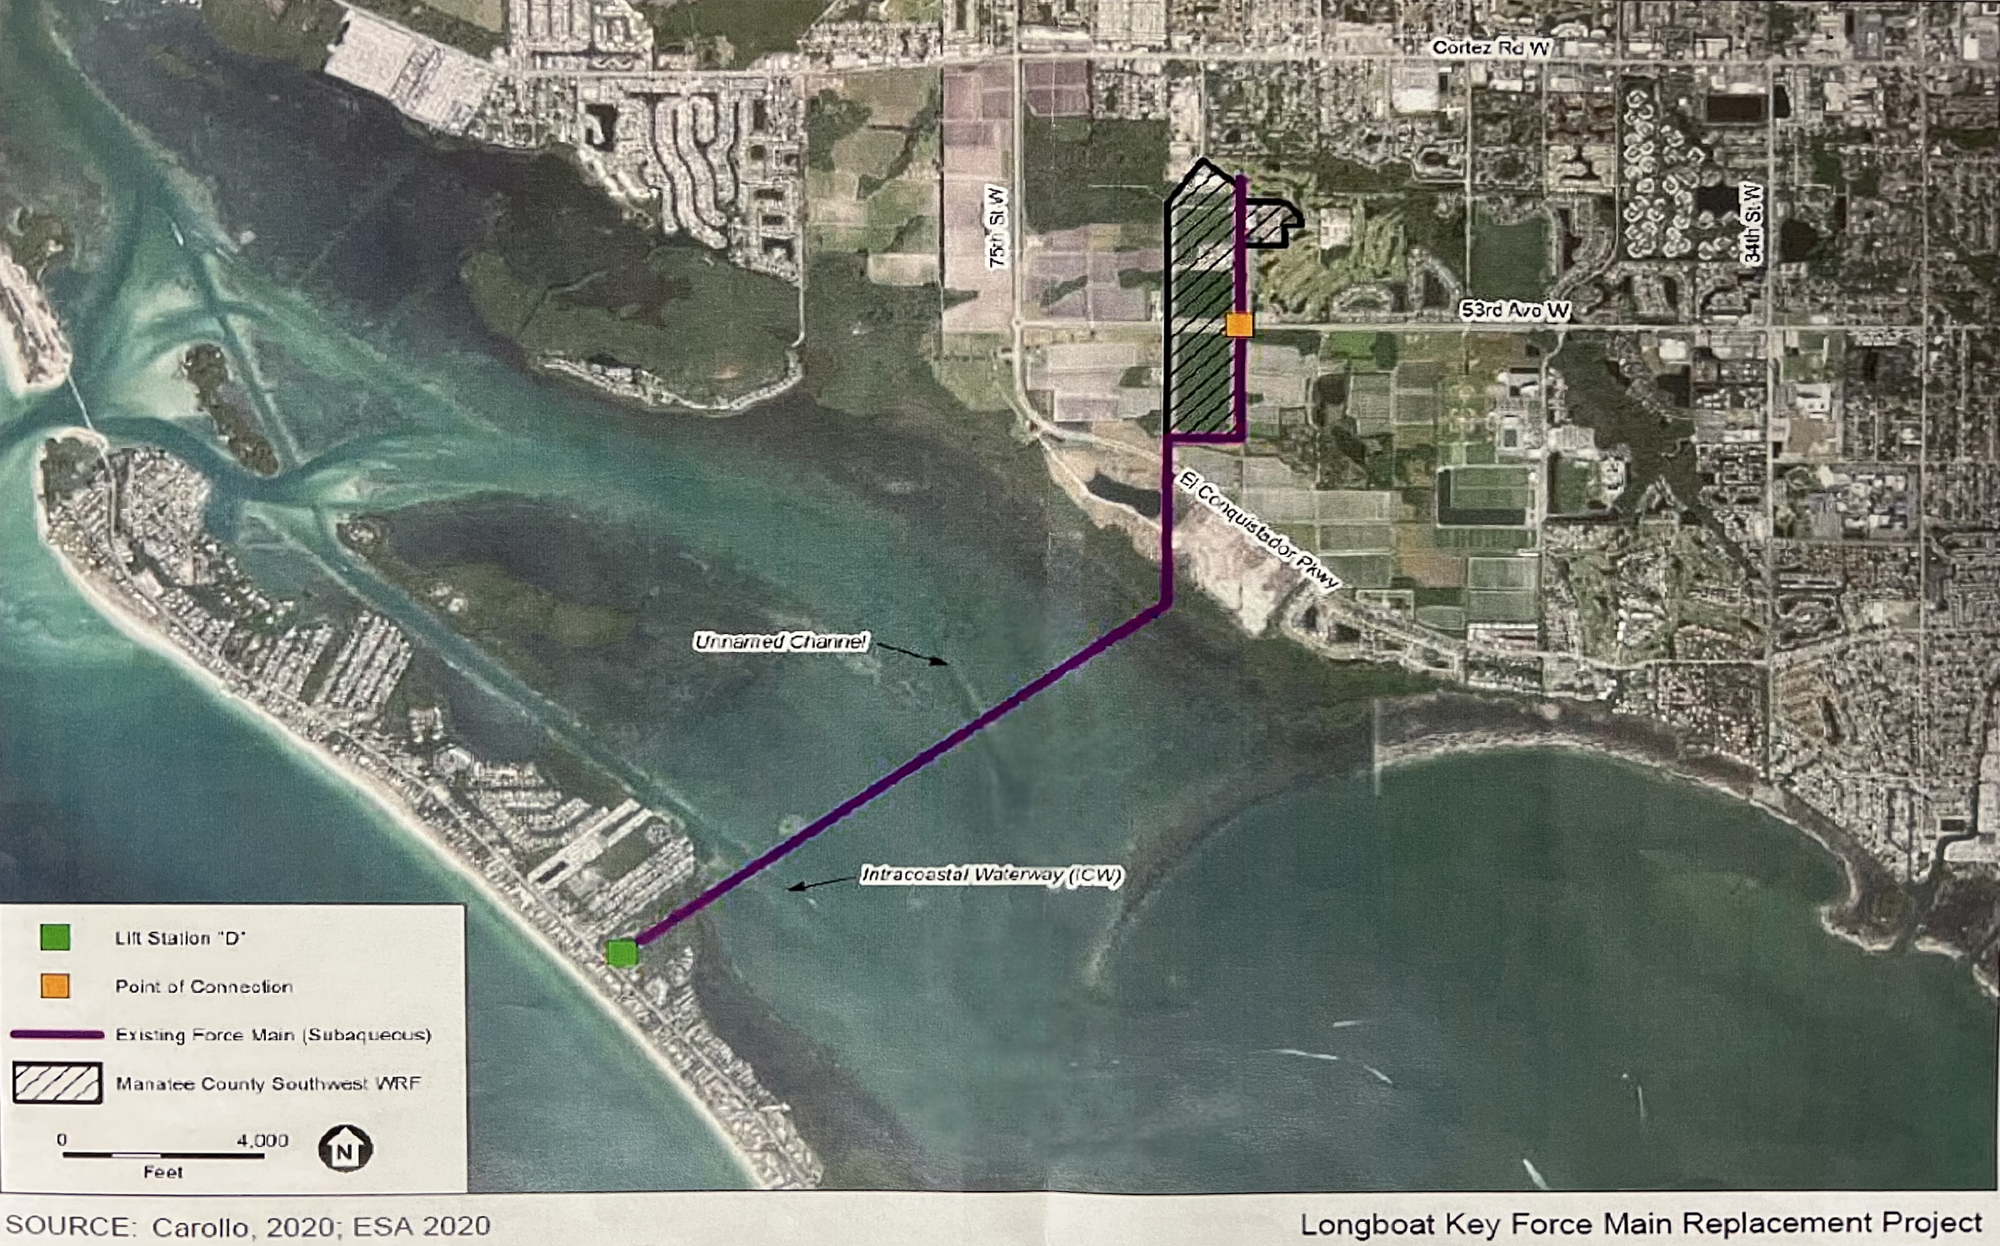 The purple line from the shore to the orange dot represents town-owned sewer line. (Courtesy rendering)